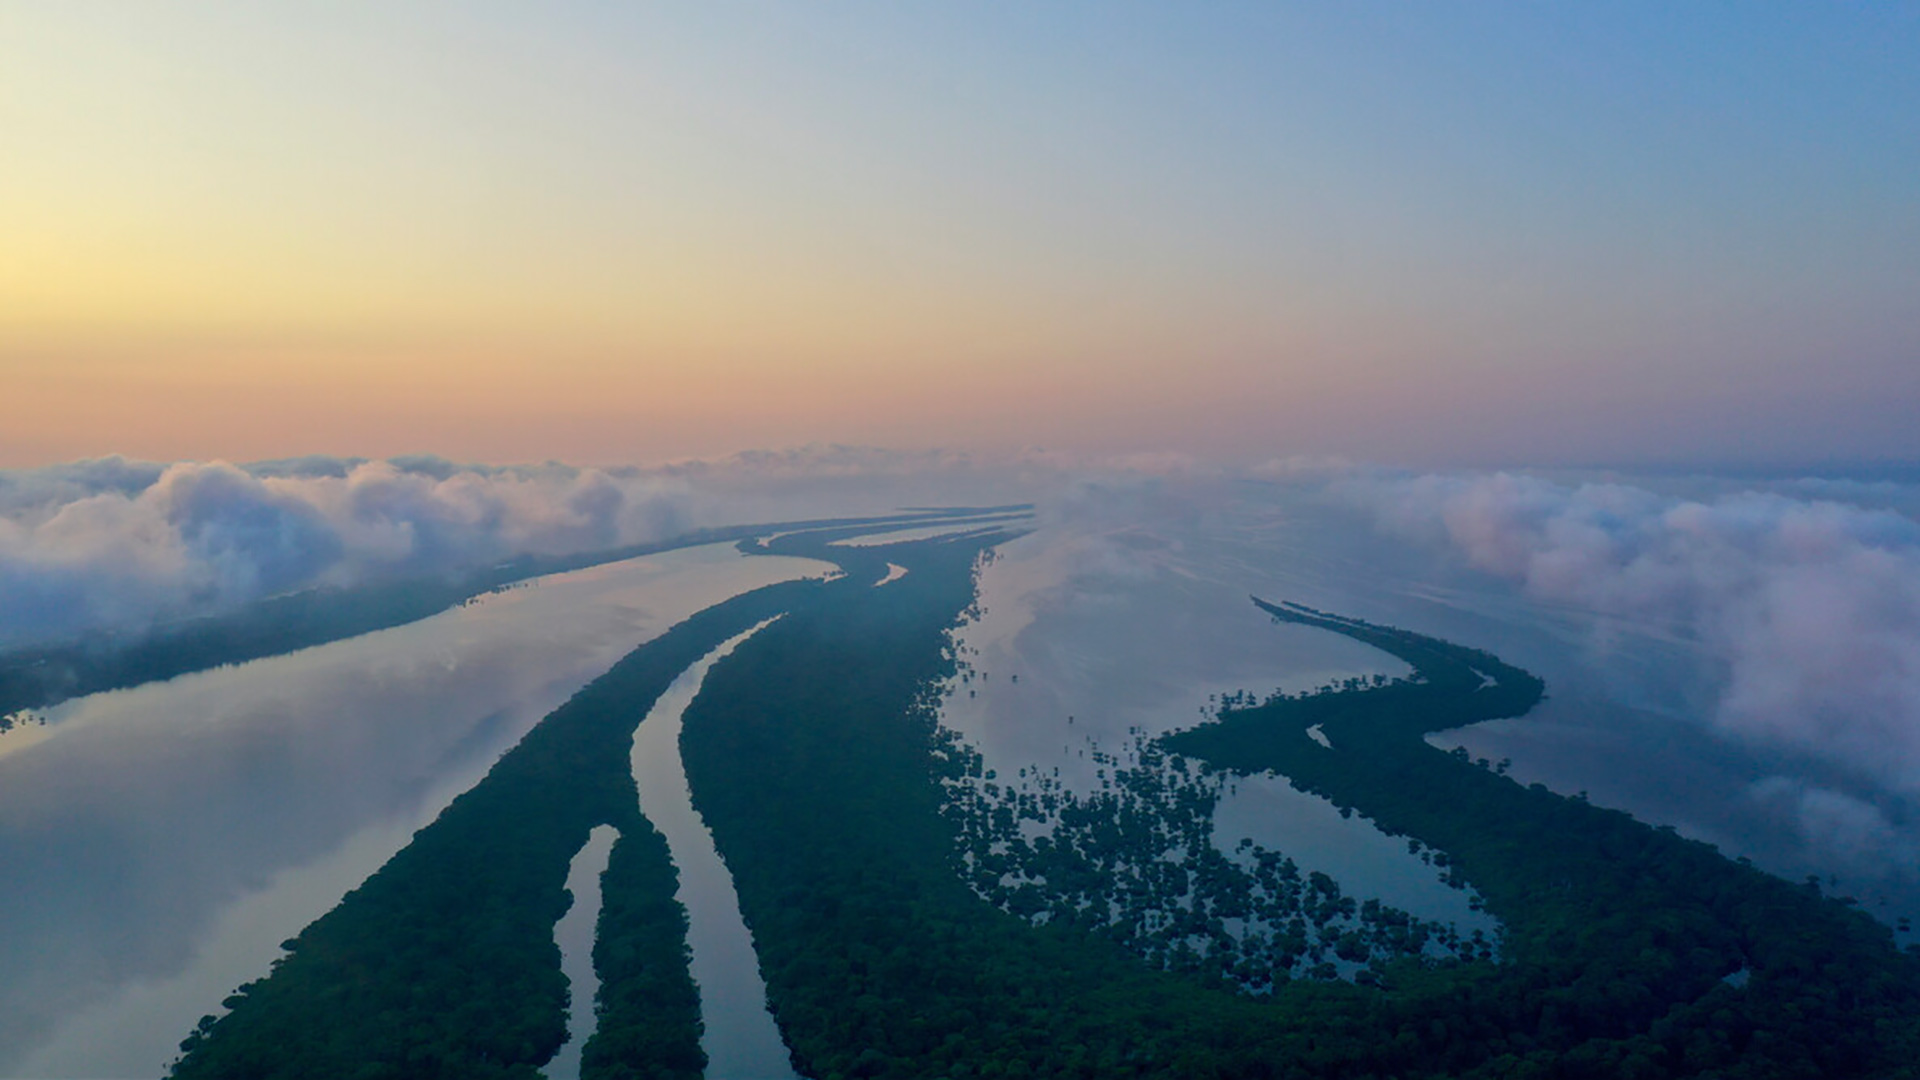 An image of the Amazon River from above